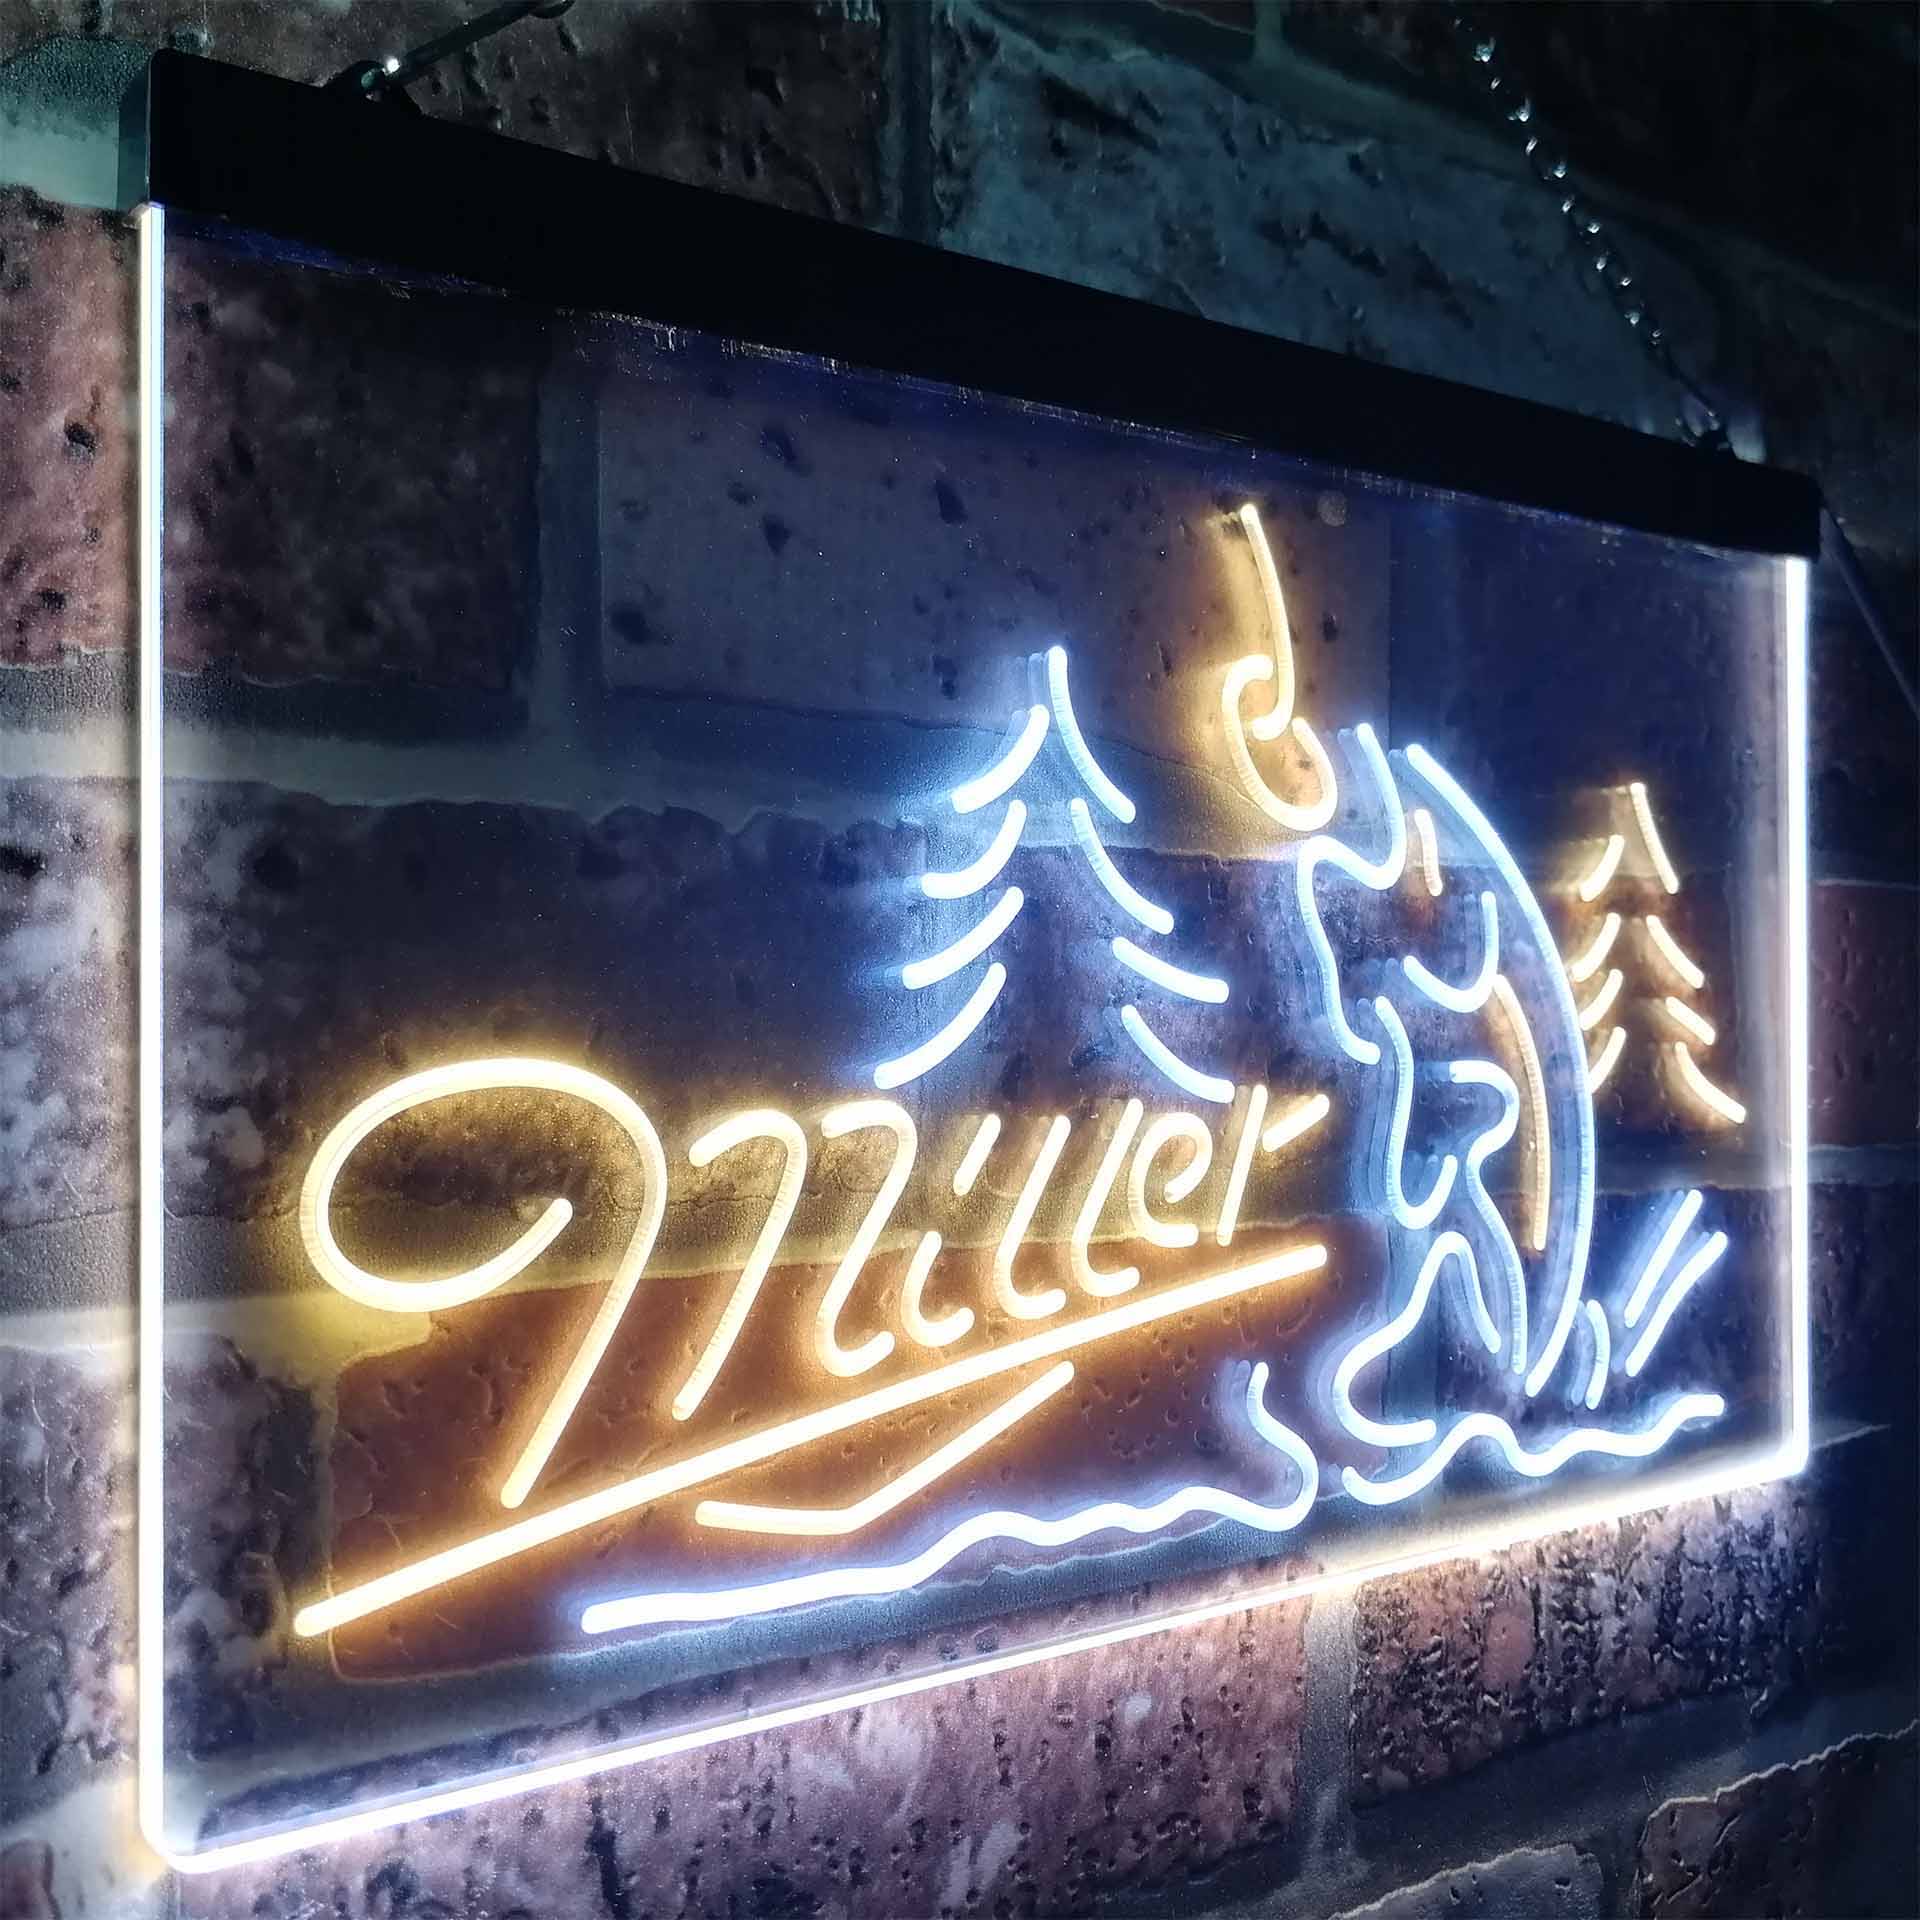 Millers Fishs Fishing LED Neon Sign